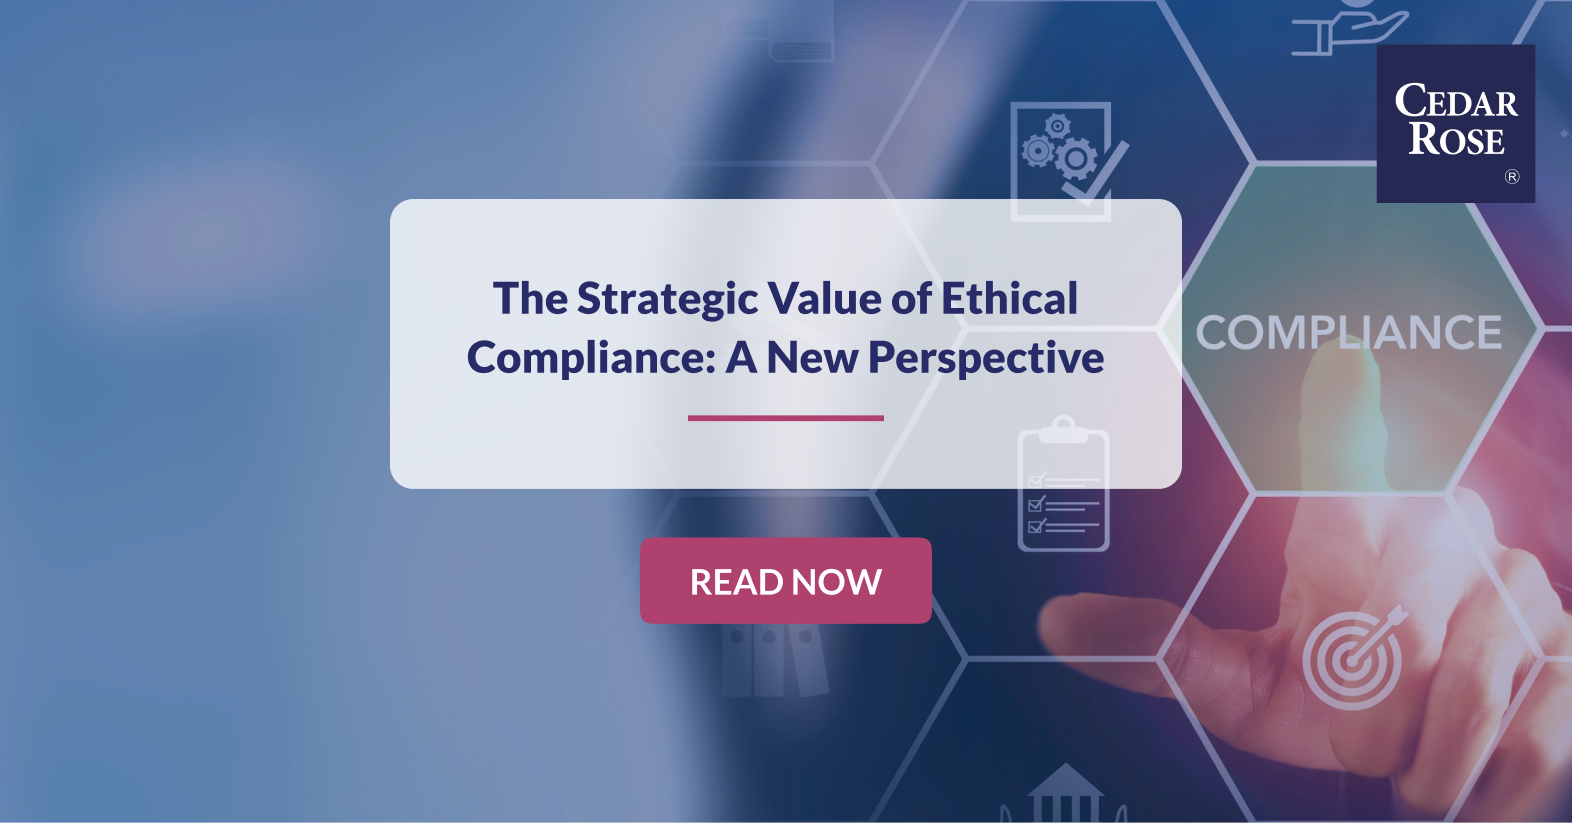 The Strategic Value of Ethical Compliance: A New Perspective